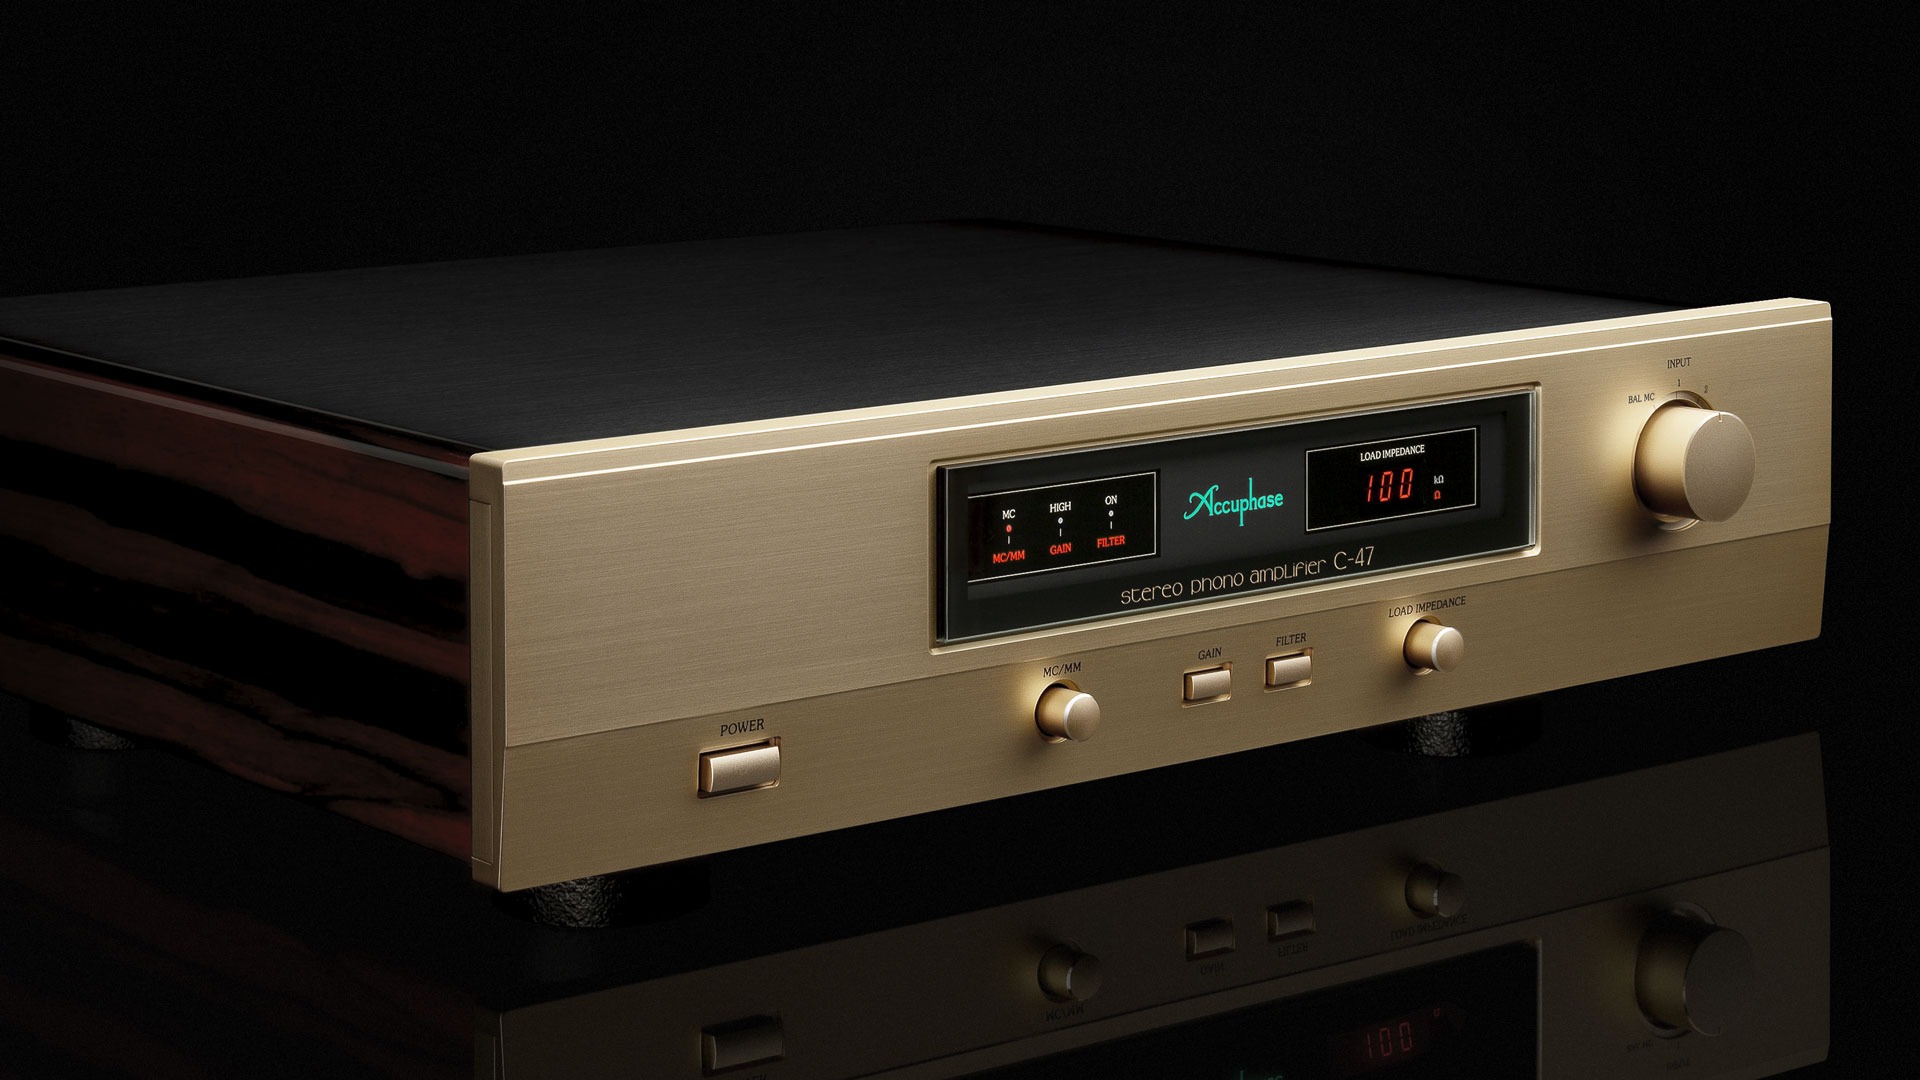 Accuphase C 47 can